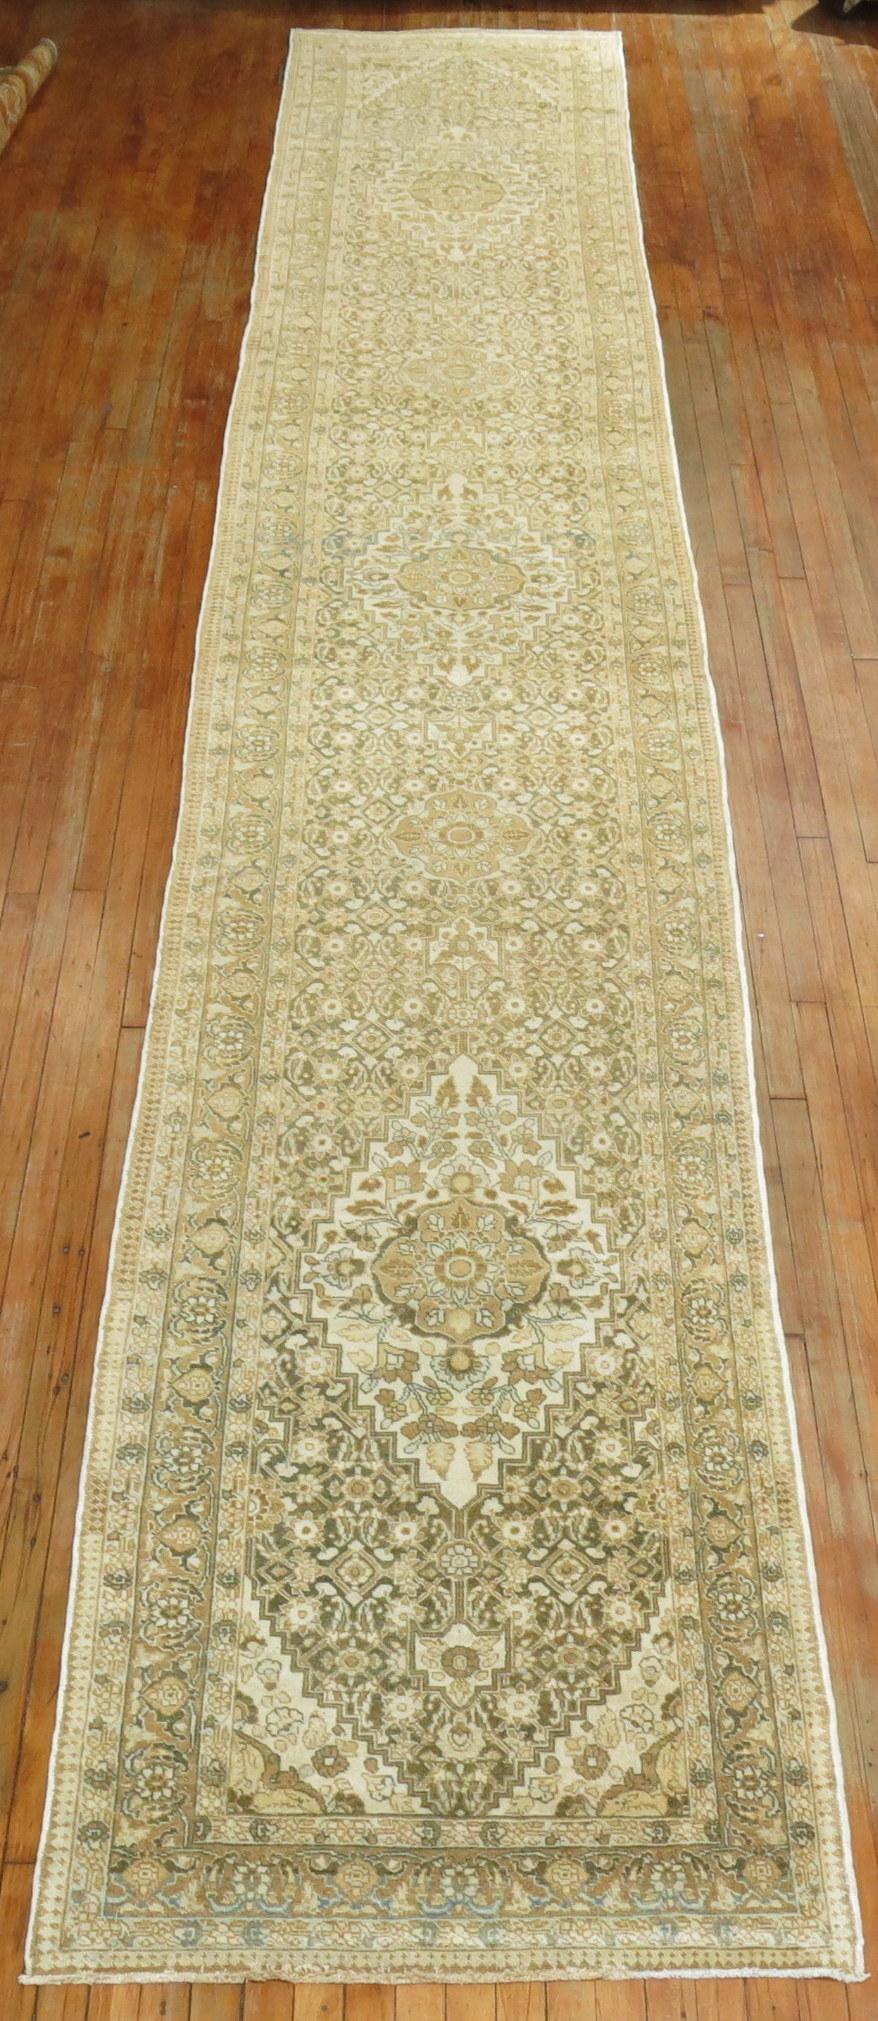 Antique Persian Tabriz runner. Predominantly Ivory, green and brown accents with 3 medallions on a Herati ground, circa 1920

Measures: 3'3” x 19'4”.